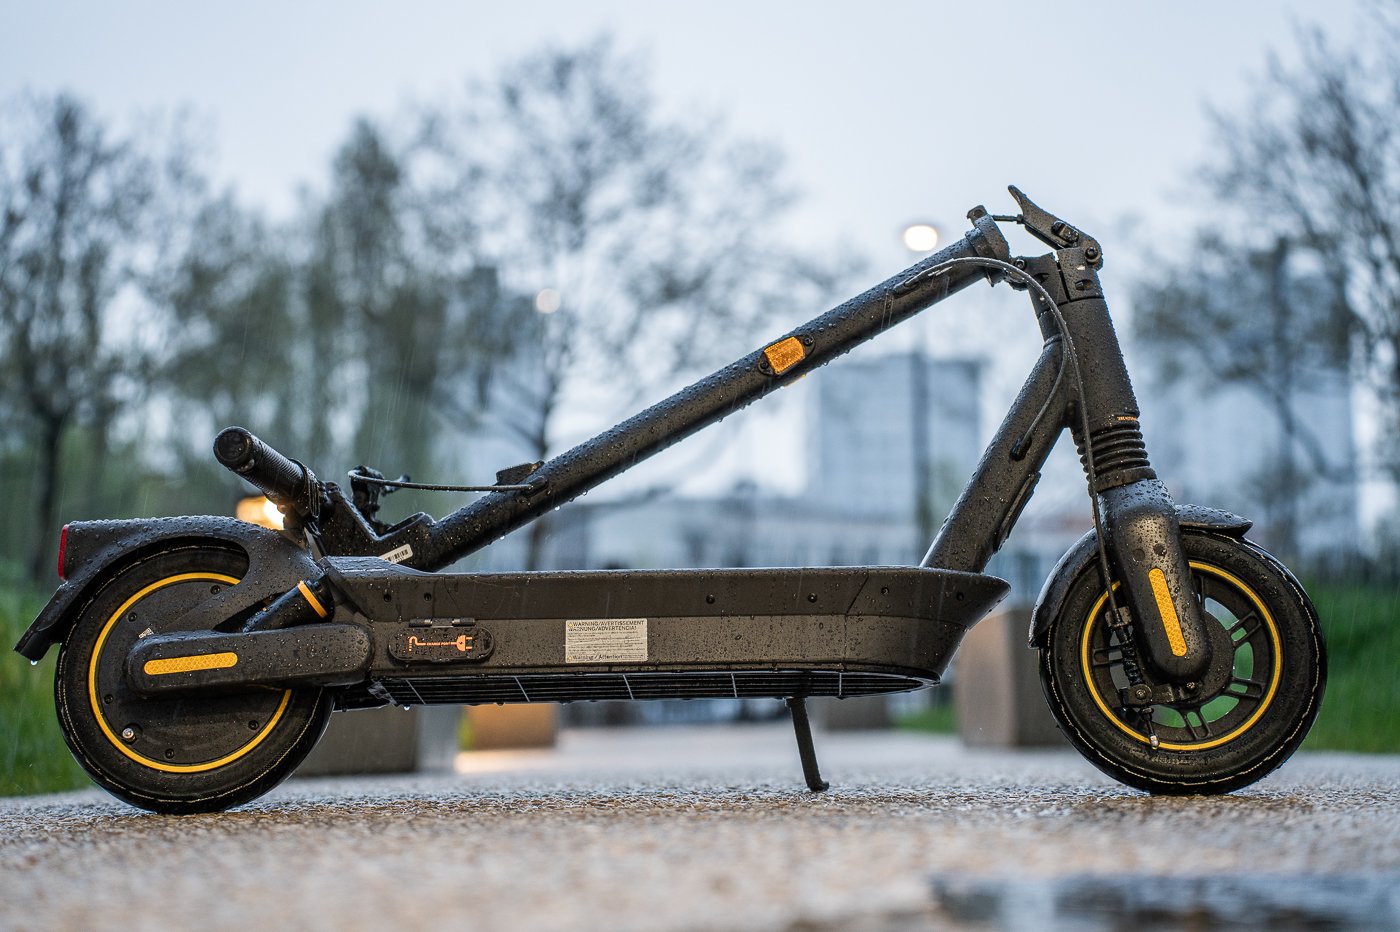 Trottinette électrique Ninebot MAX G2 powered by Segway - BioSpeed